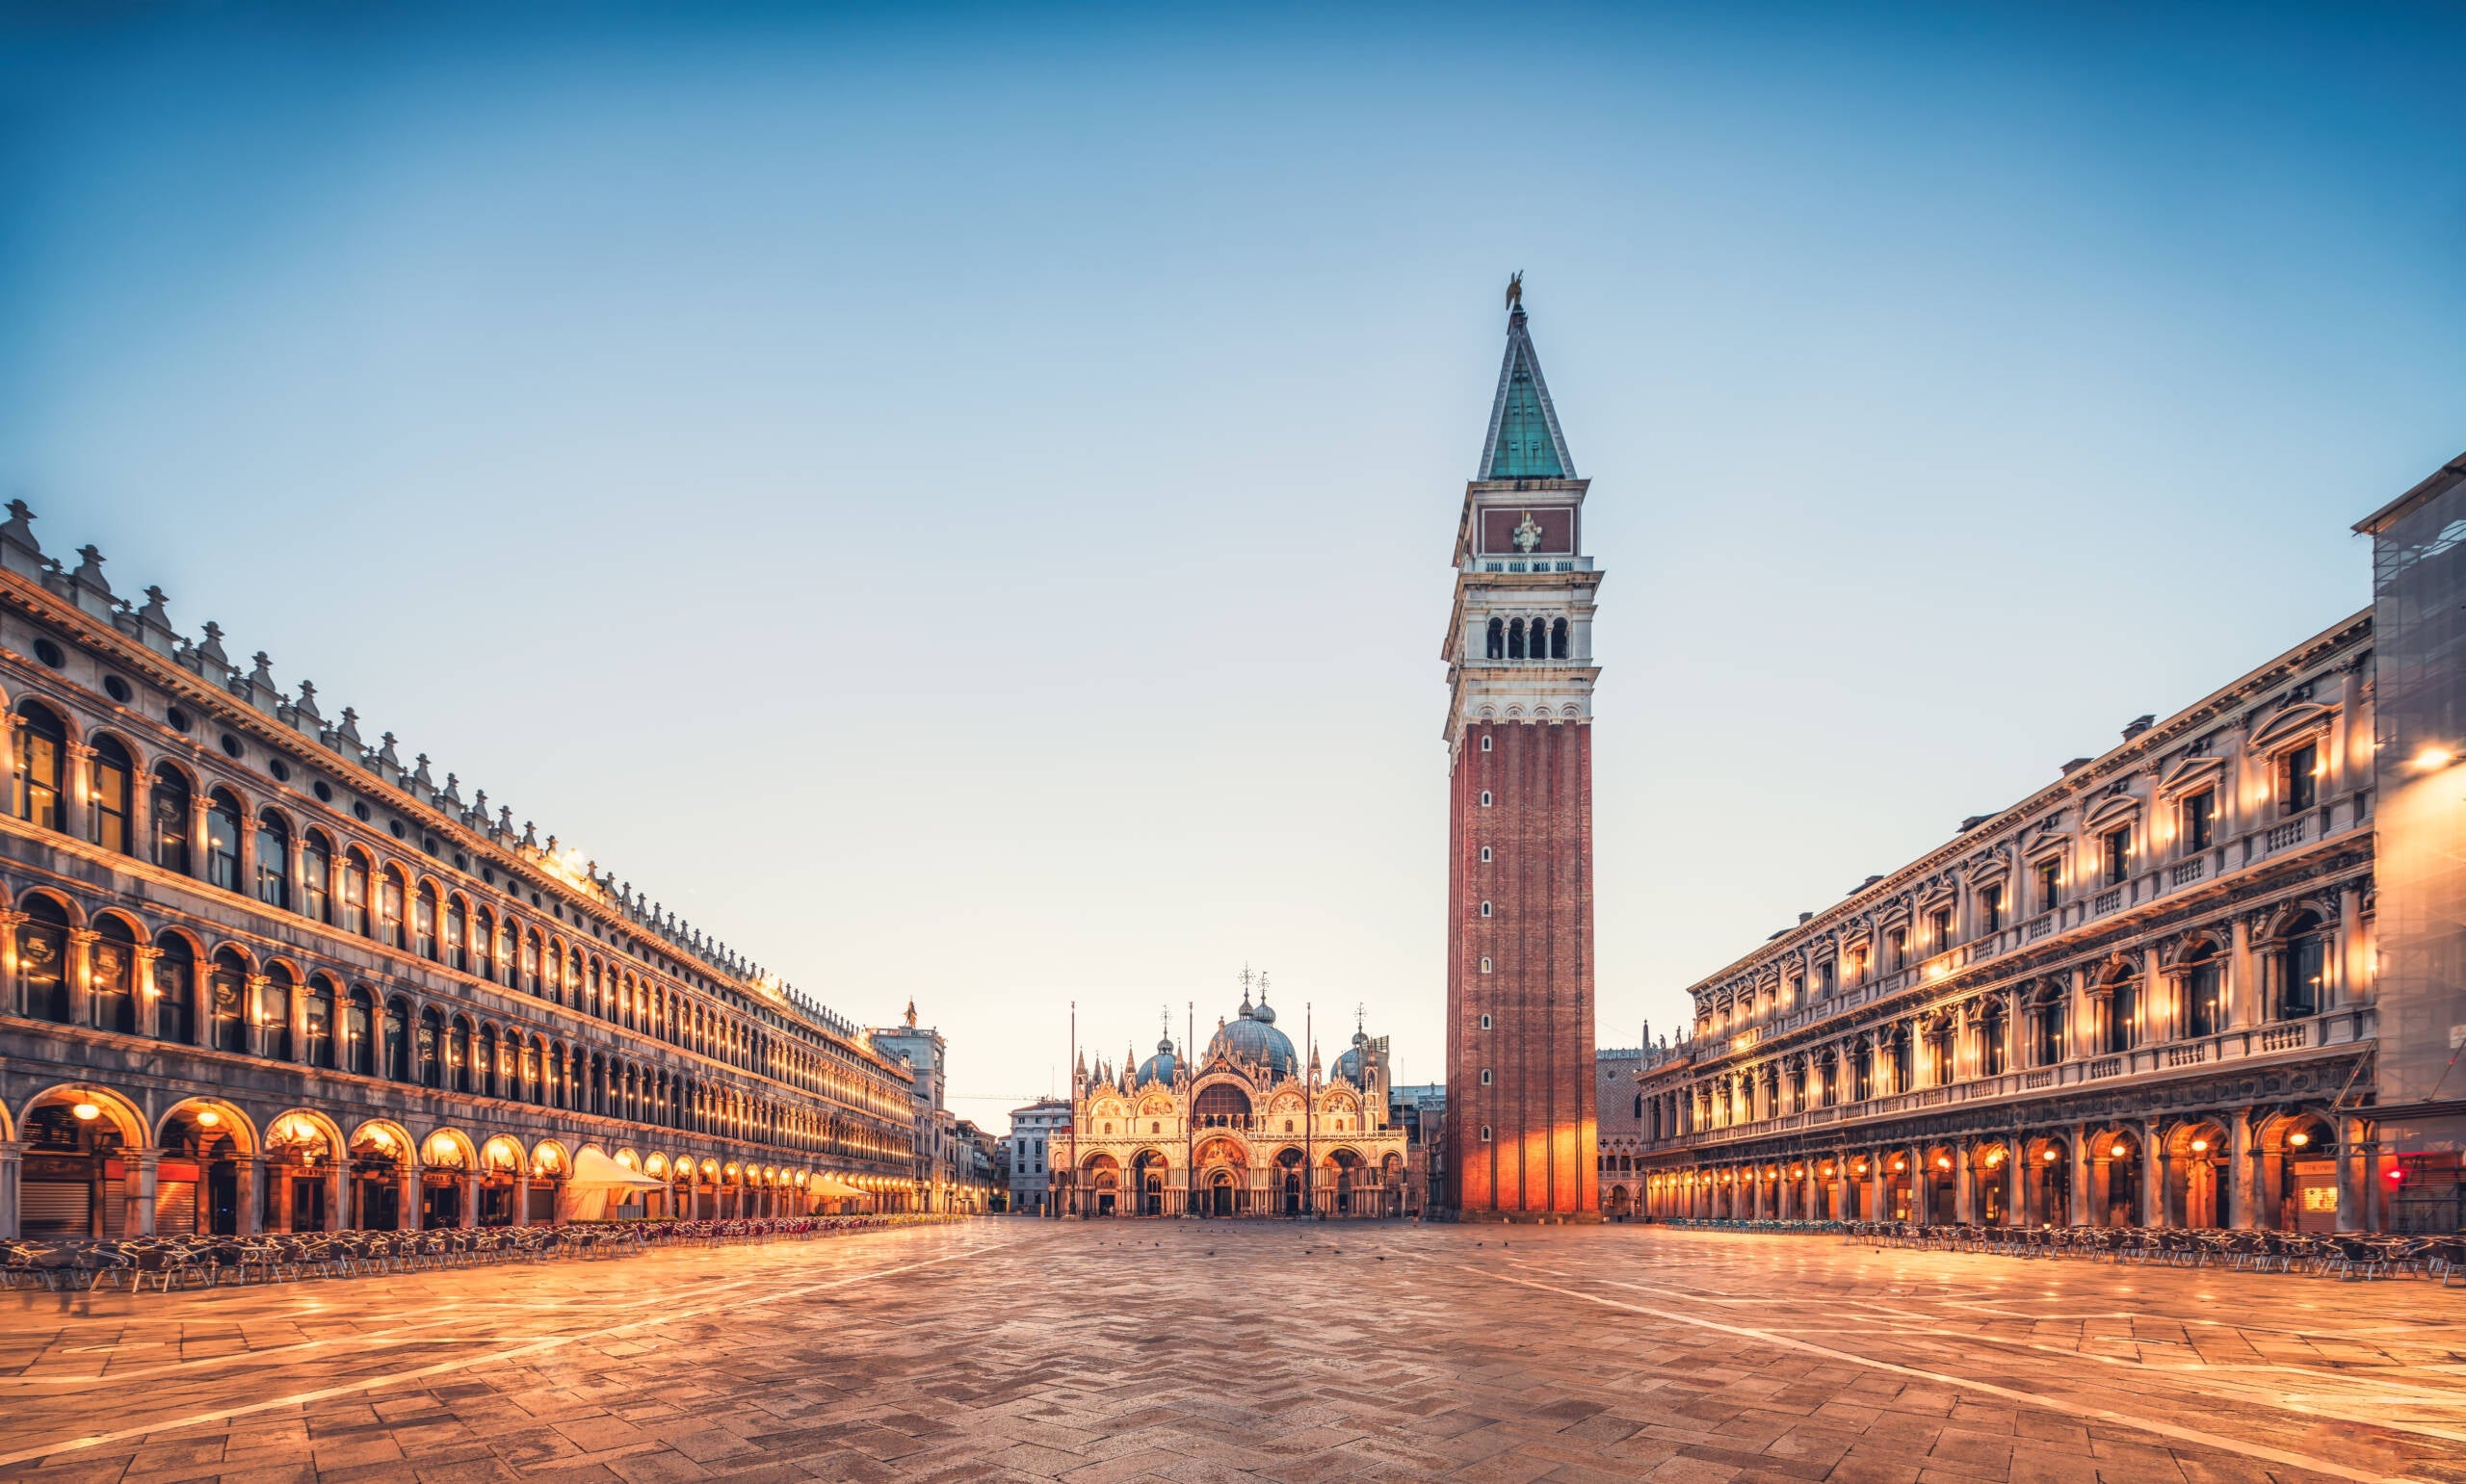 St Marks Square and St. Mark's Basilica in the early morning,Venice,Italy